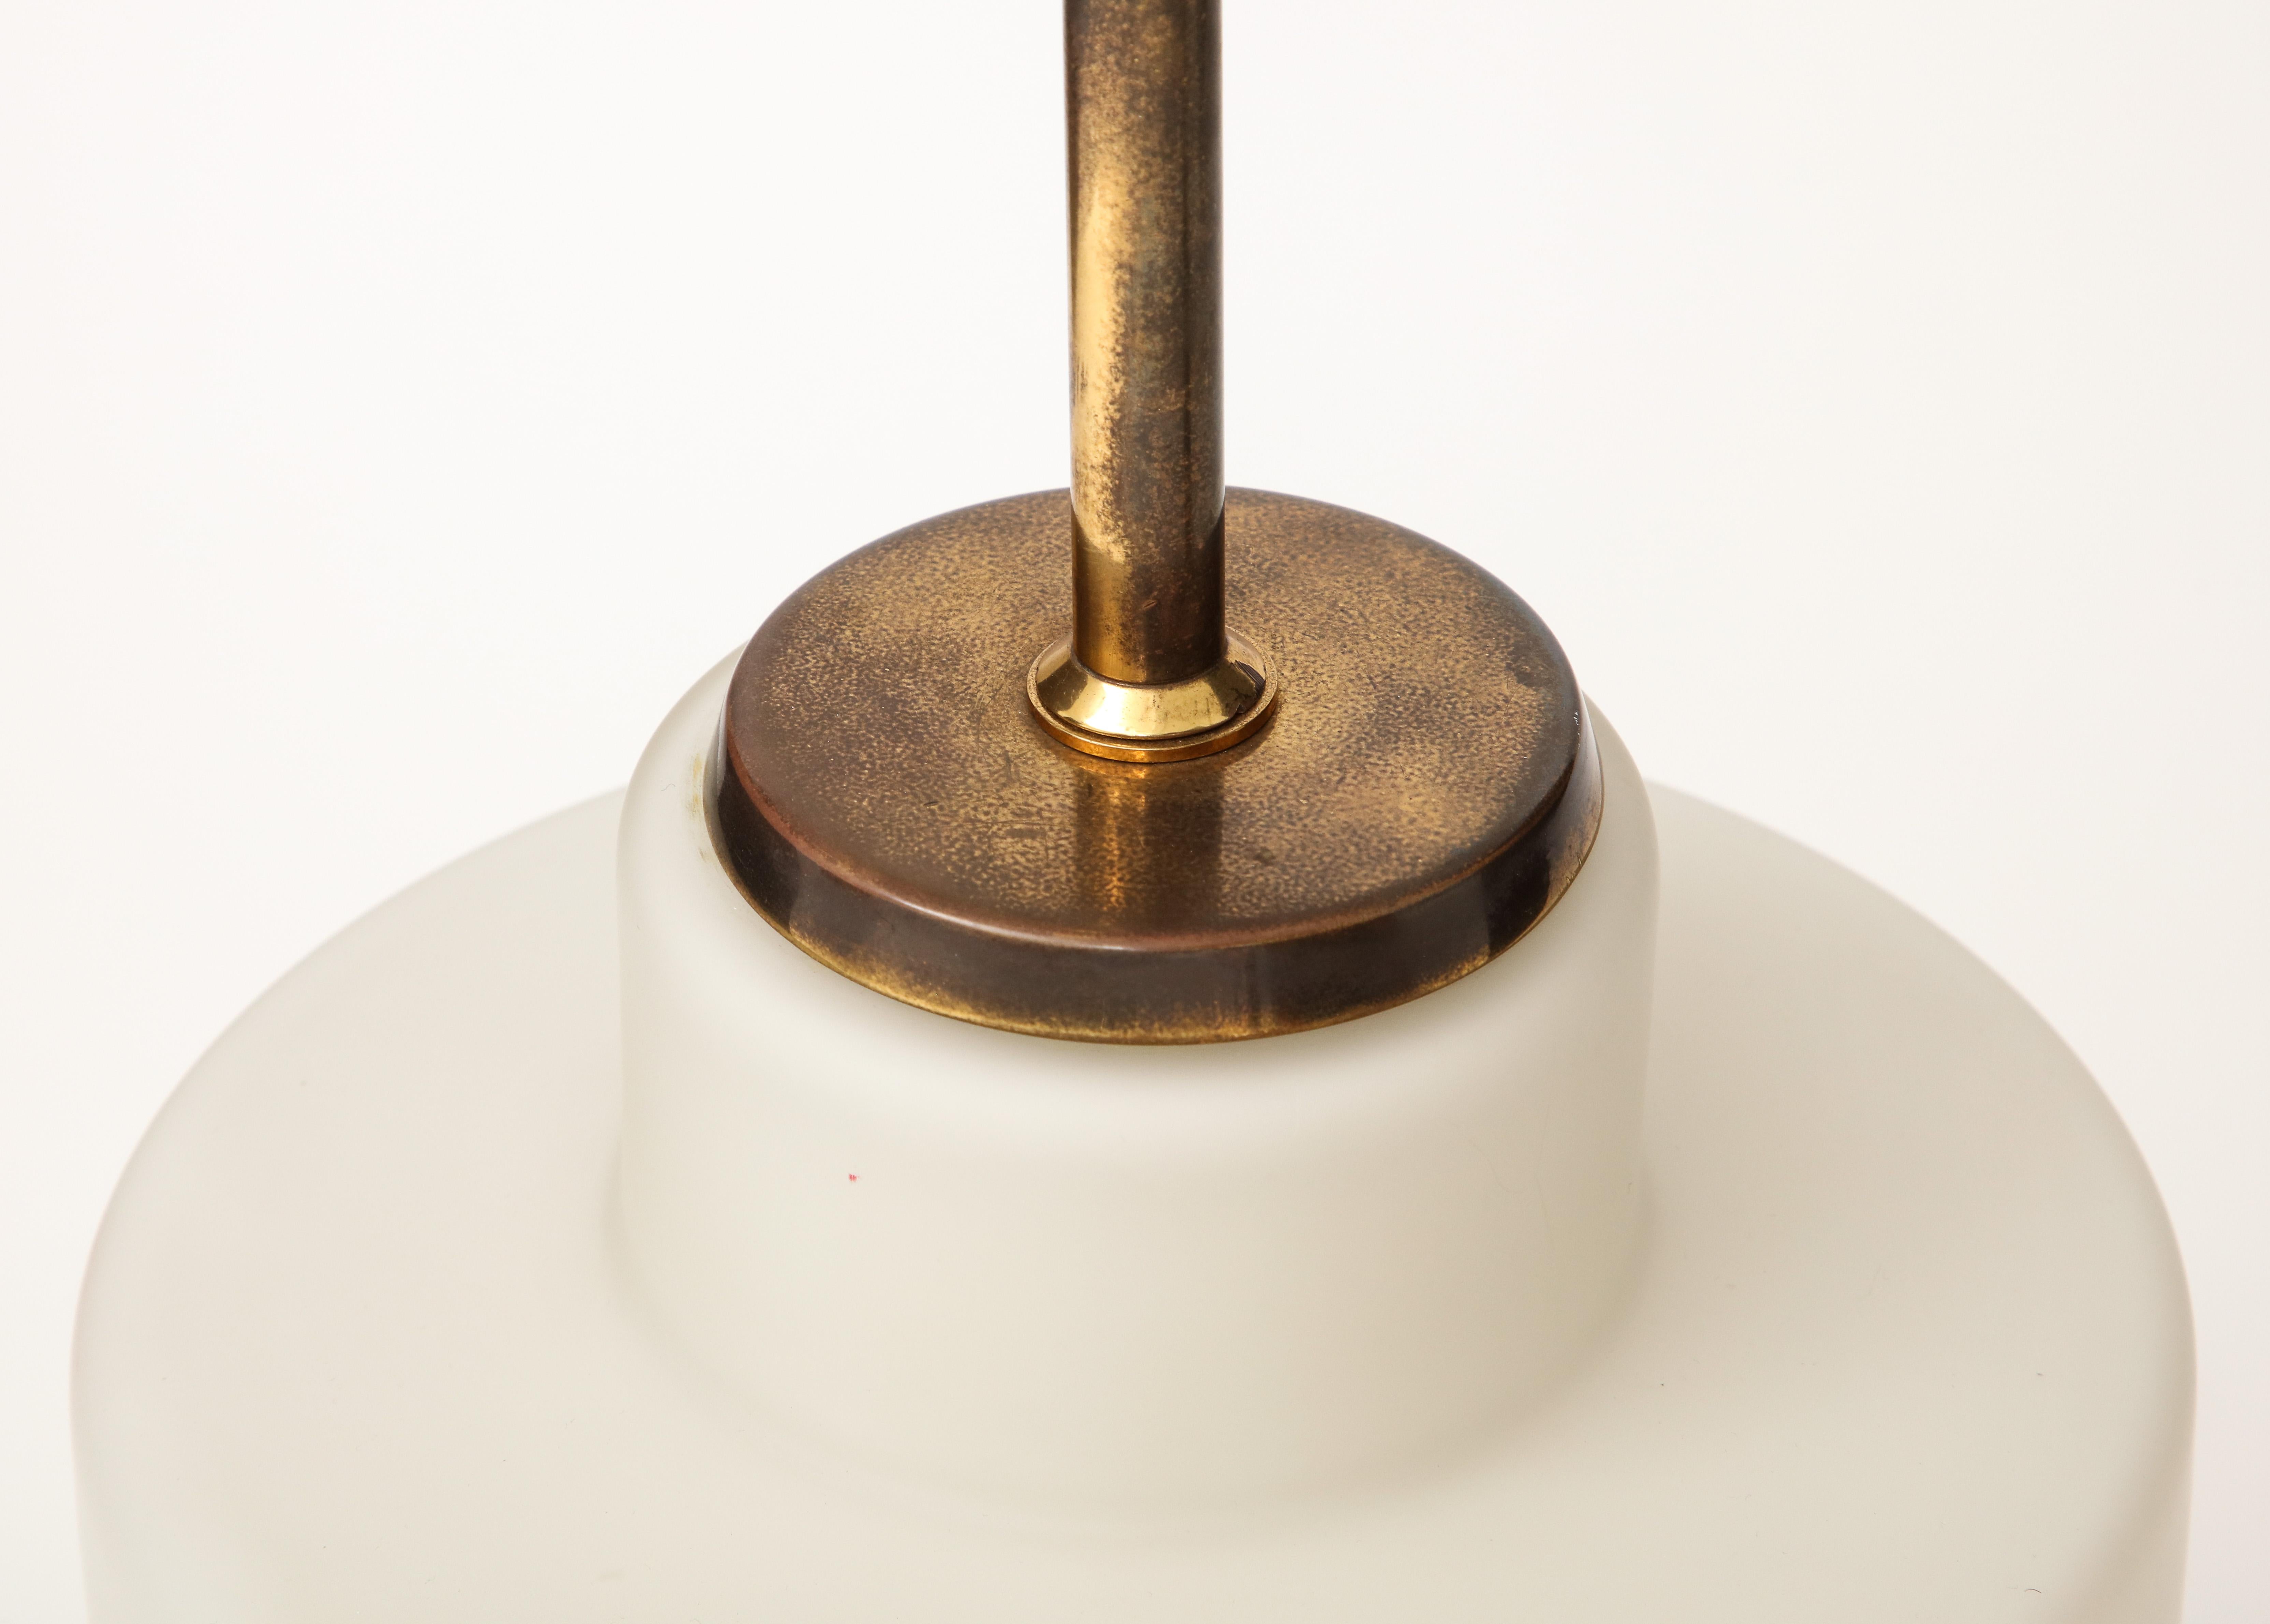 Mid-20th Century Stilnovo Opaline & Brass Lamp, mod. 8055, Parchment Shade, Italy, c. 1950's For Sale